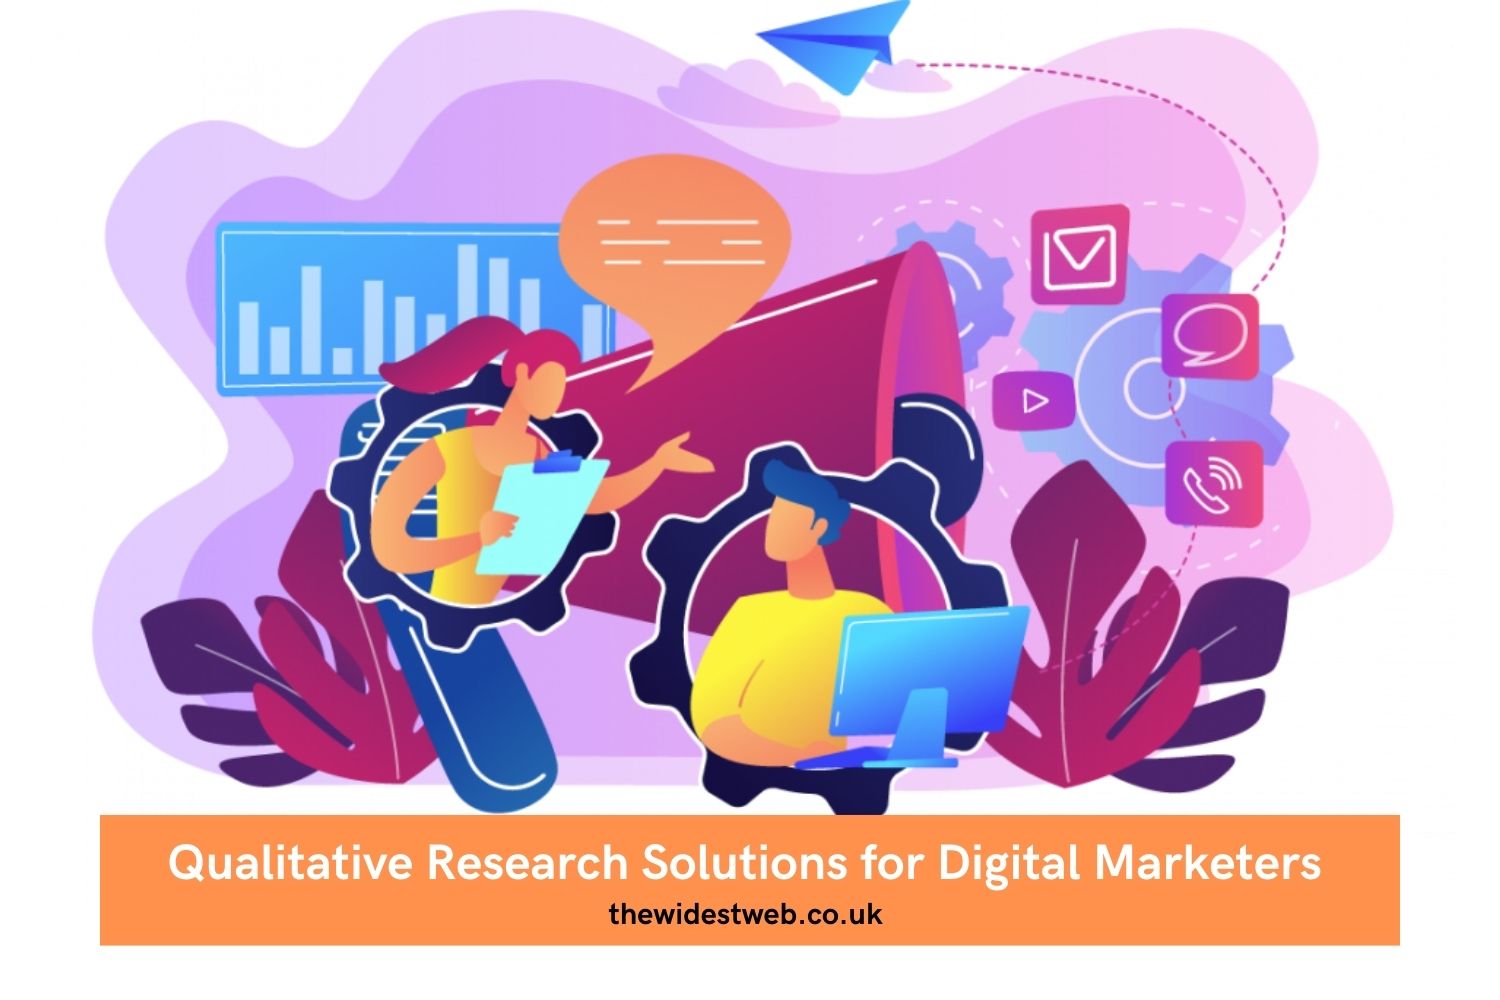 Top 7 Qualitative Research Solutions for Digital Marketers